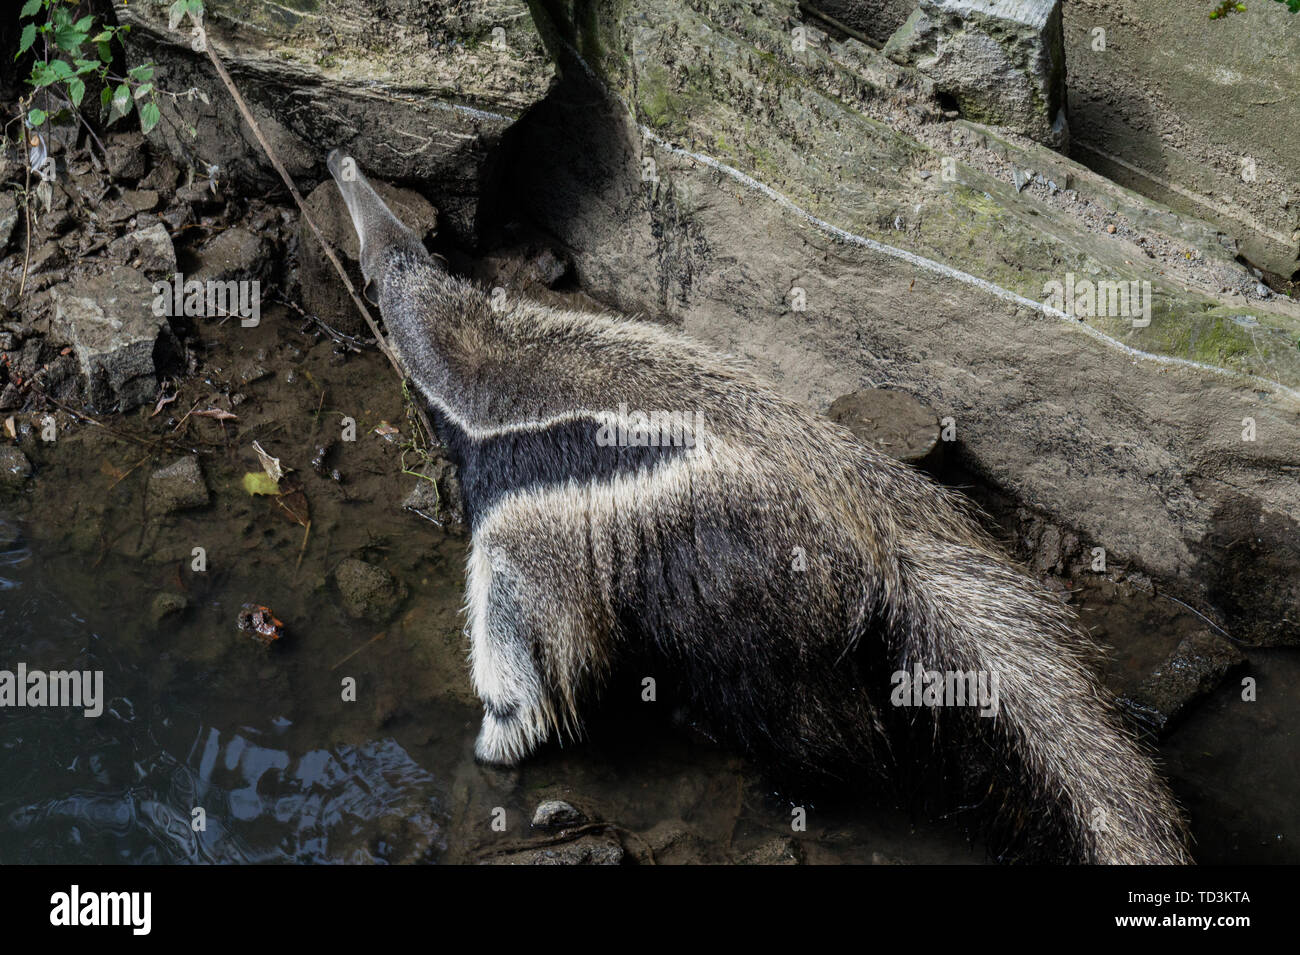 Whole anteater searching for ants on a rock Stock Photo